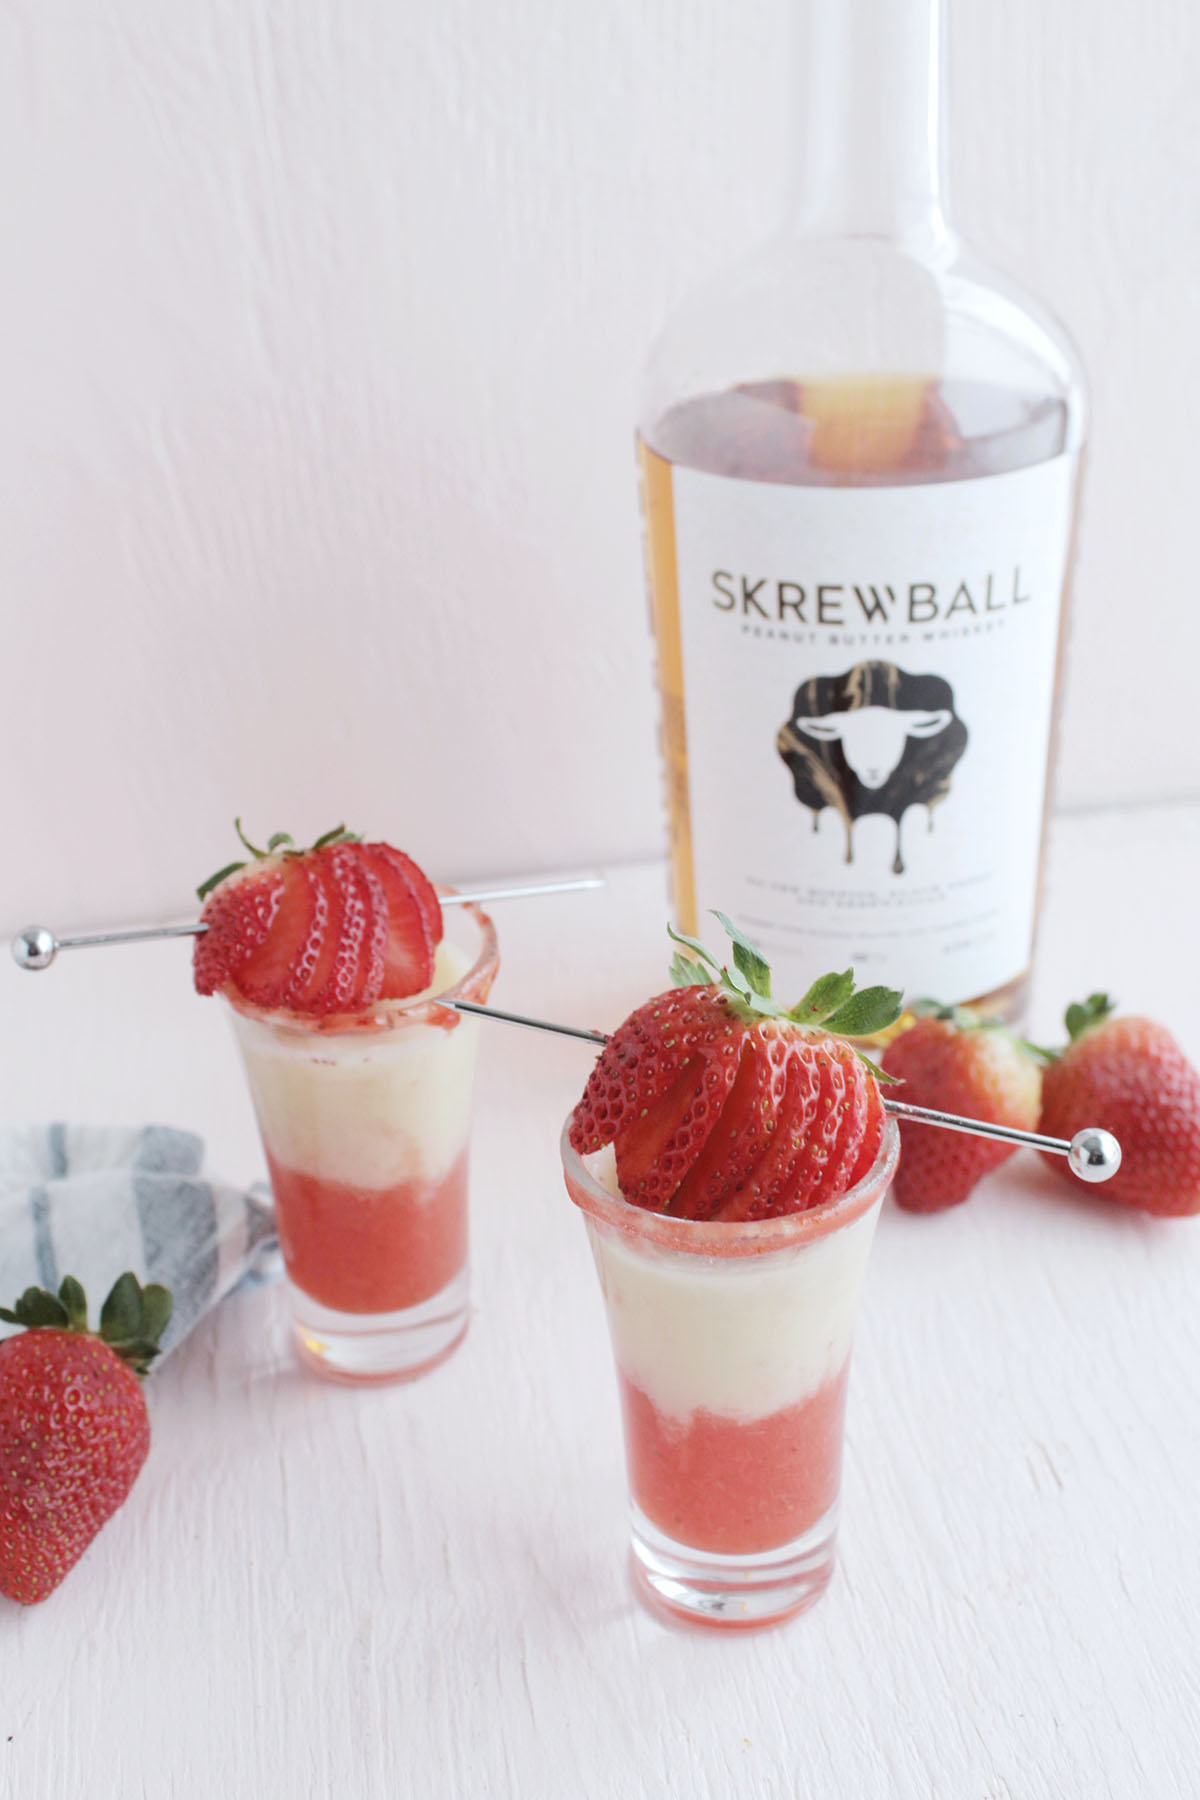 skrewball peanut butter whiskey shot with strawberry